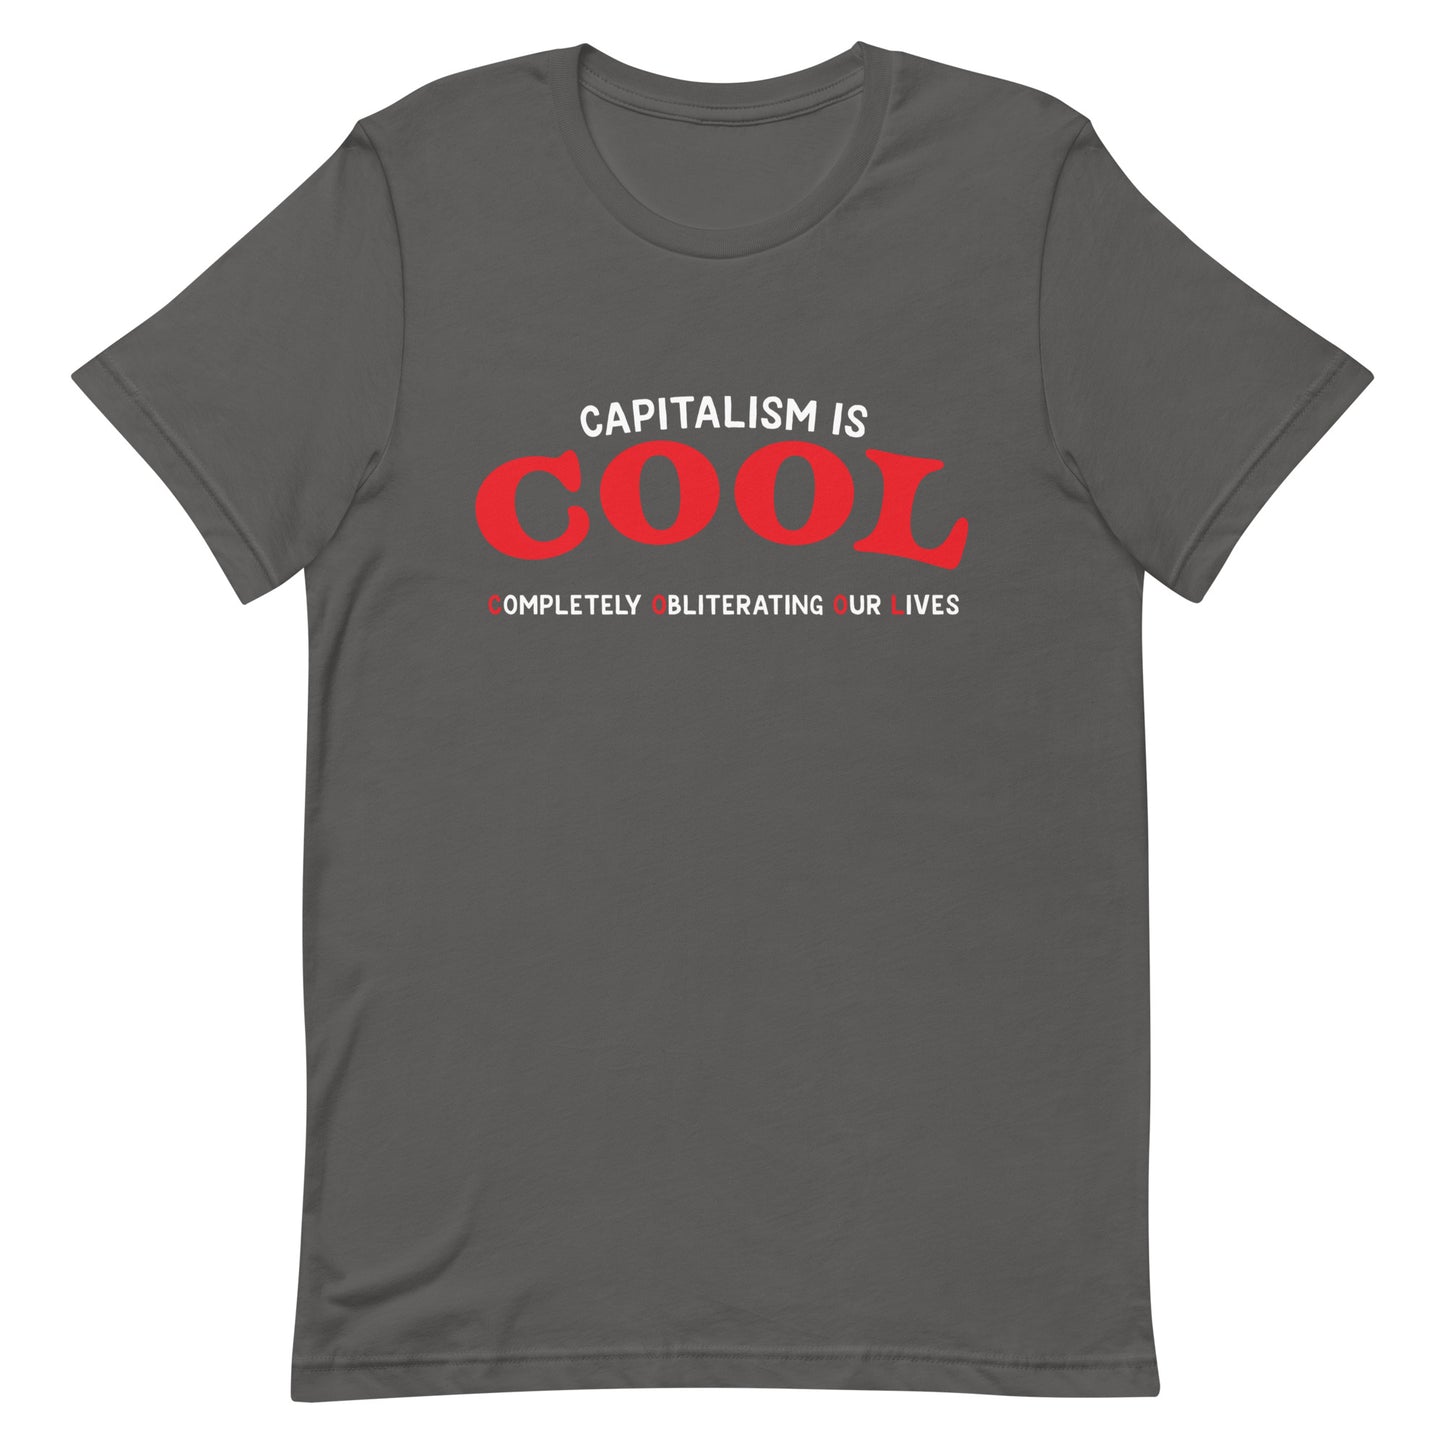 Capitalism is Cool (Completely Obliterating Our Lives) Unisex t-shirt